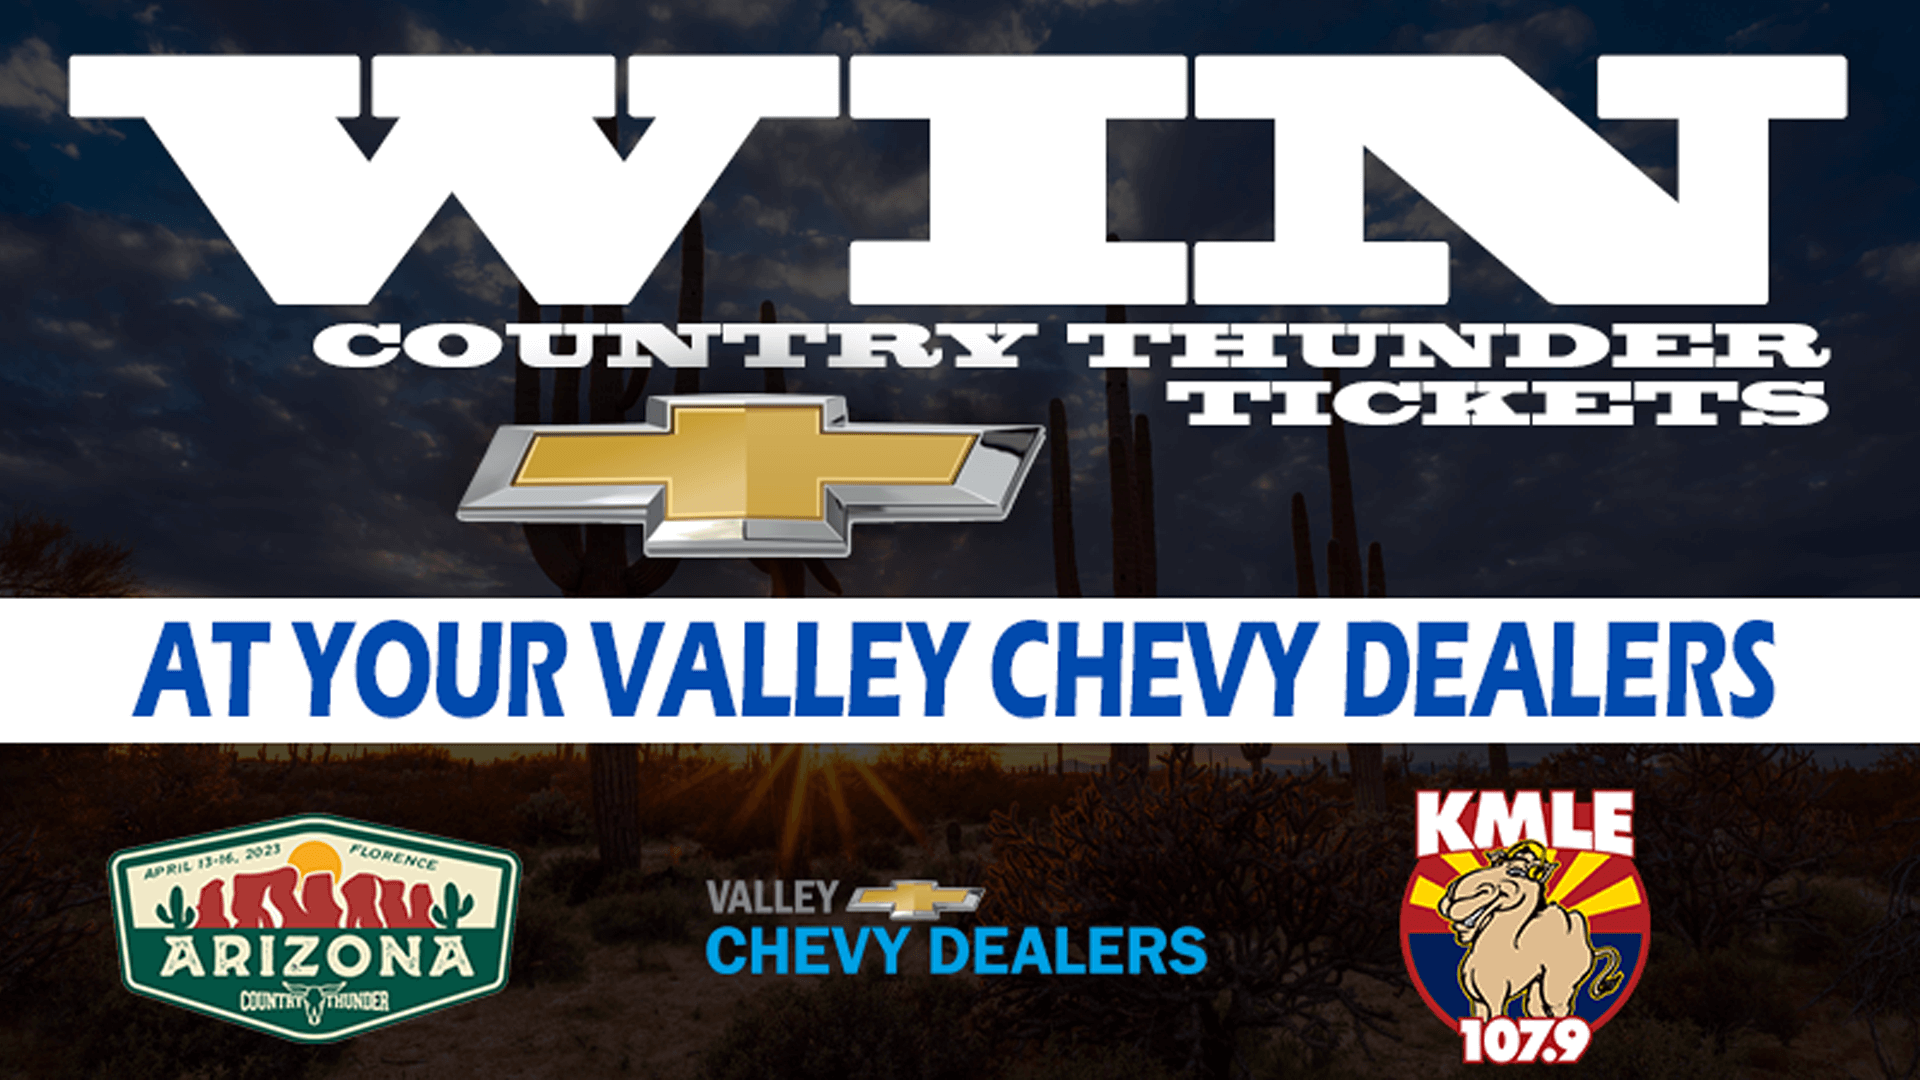 Valley Chevy_Email Header_1920x1080 (1)